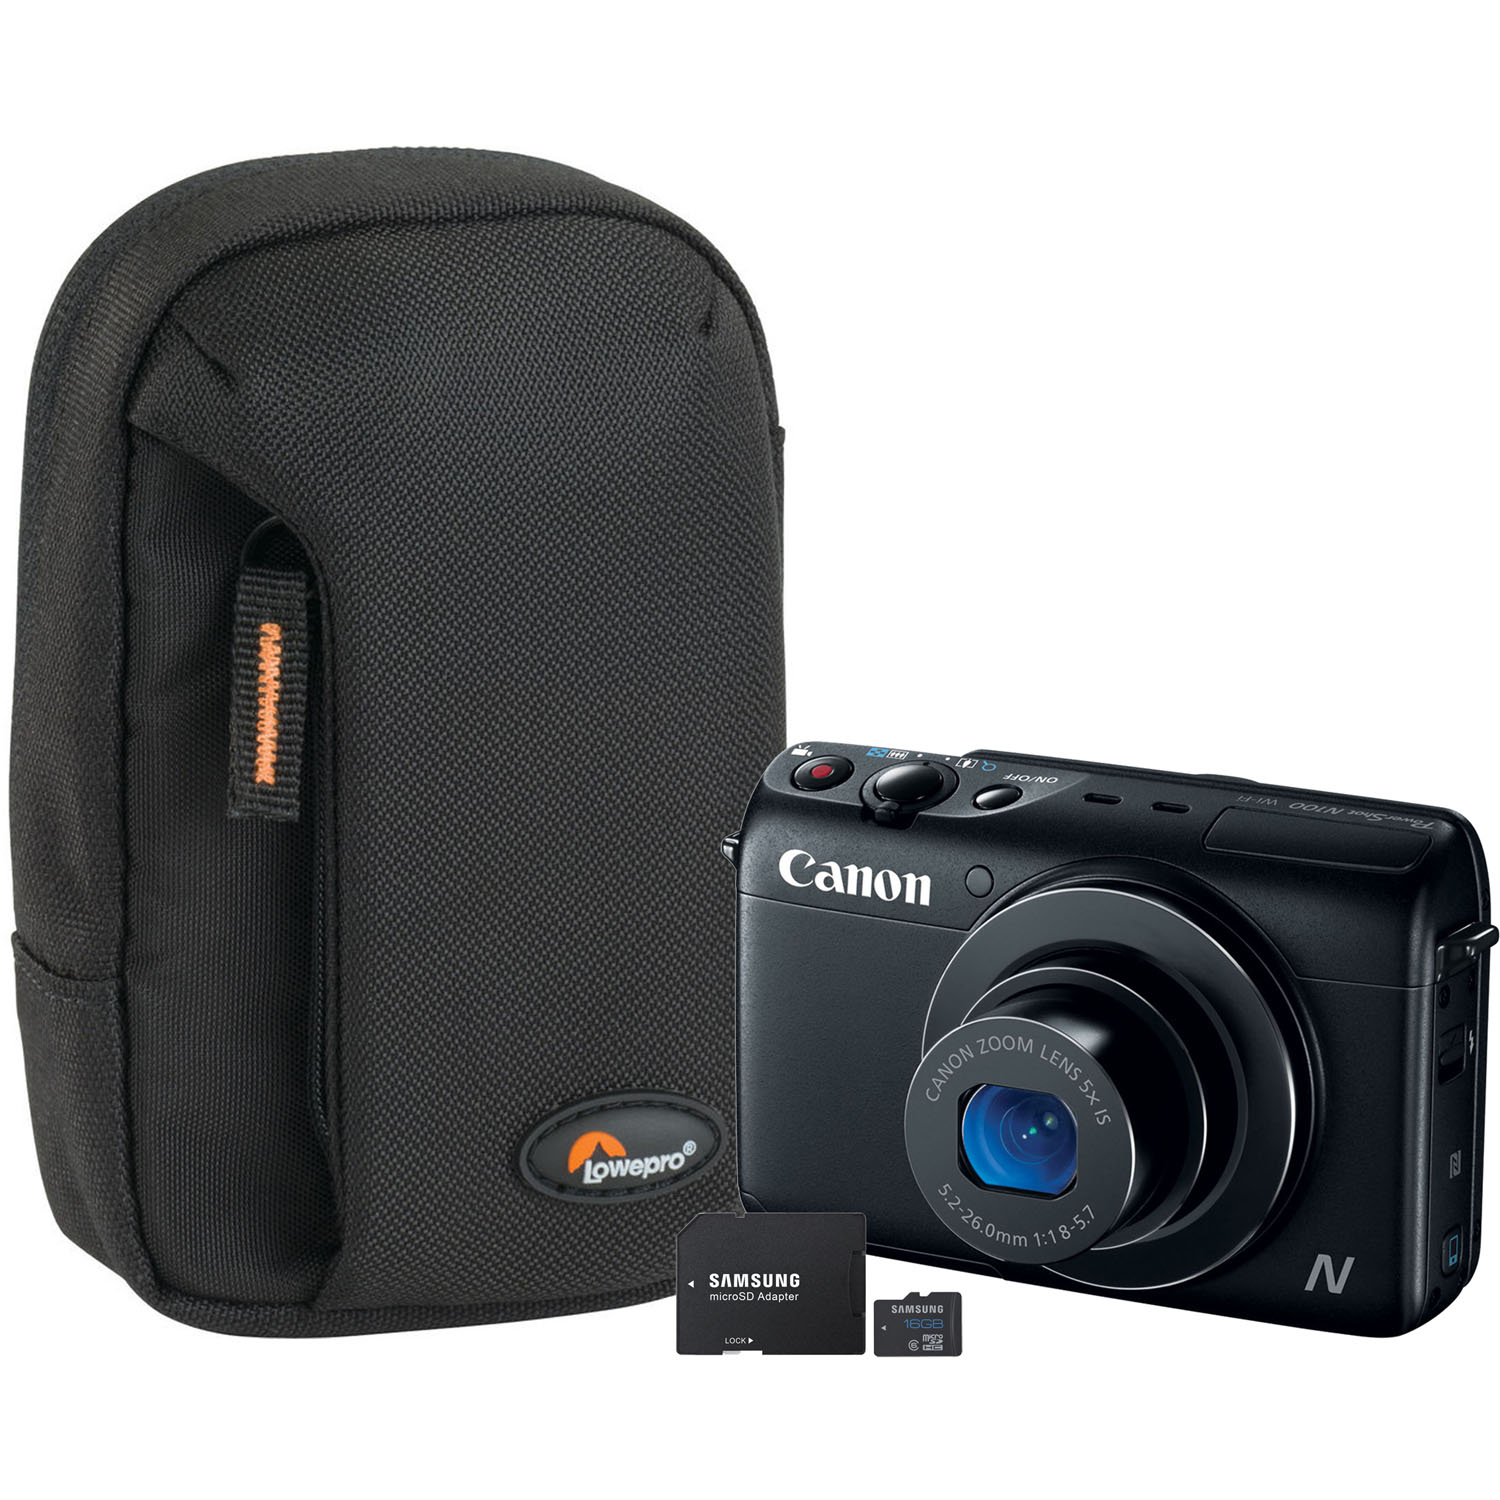 PowerShot N100 12.1MP Black Digital Camera, 16GB microSD Card with Adapter and Compact Camera Pouch